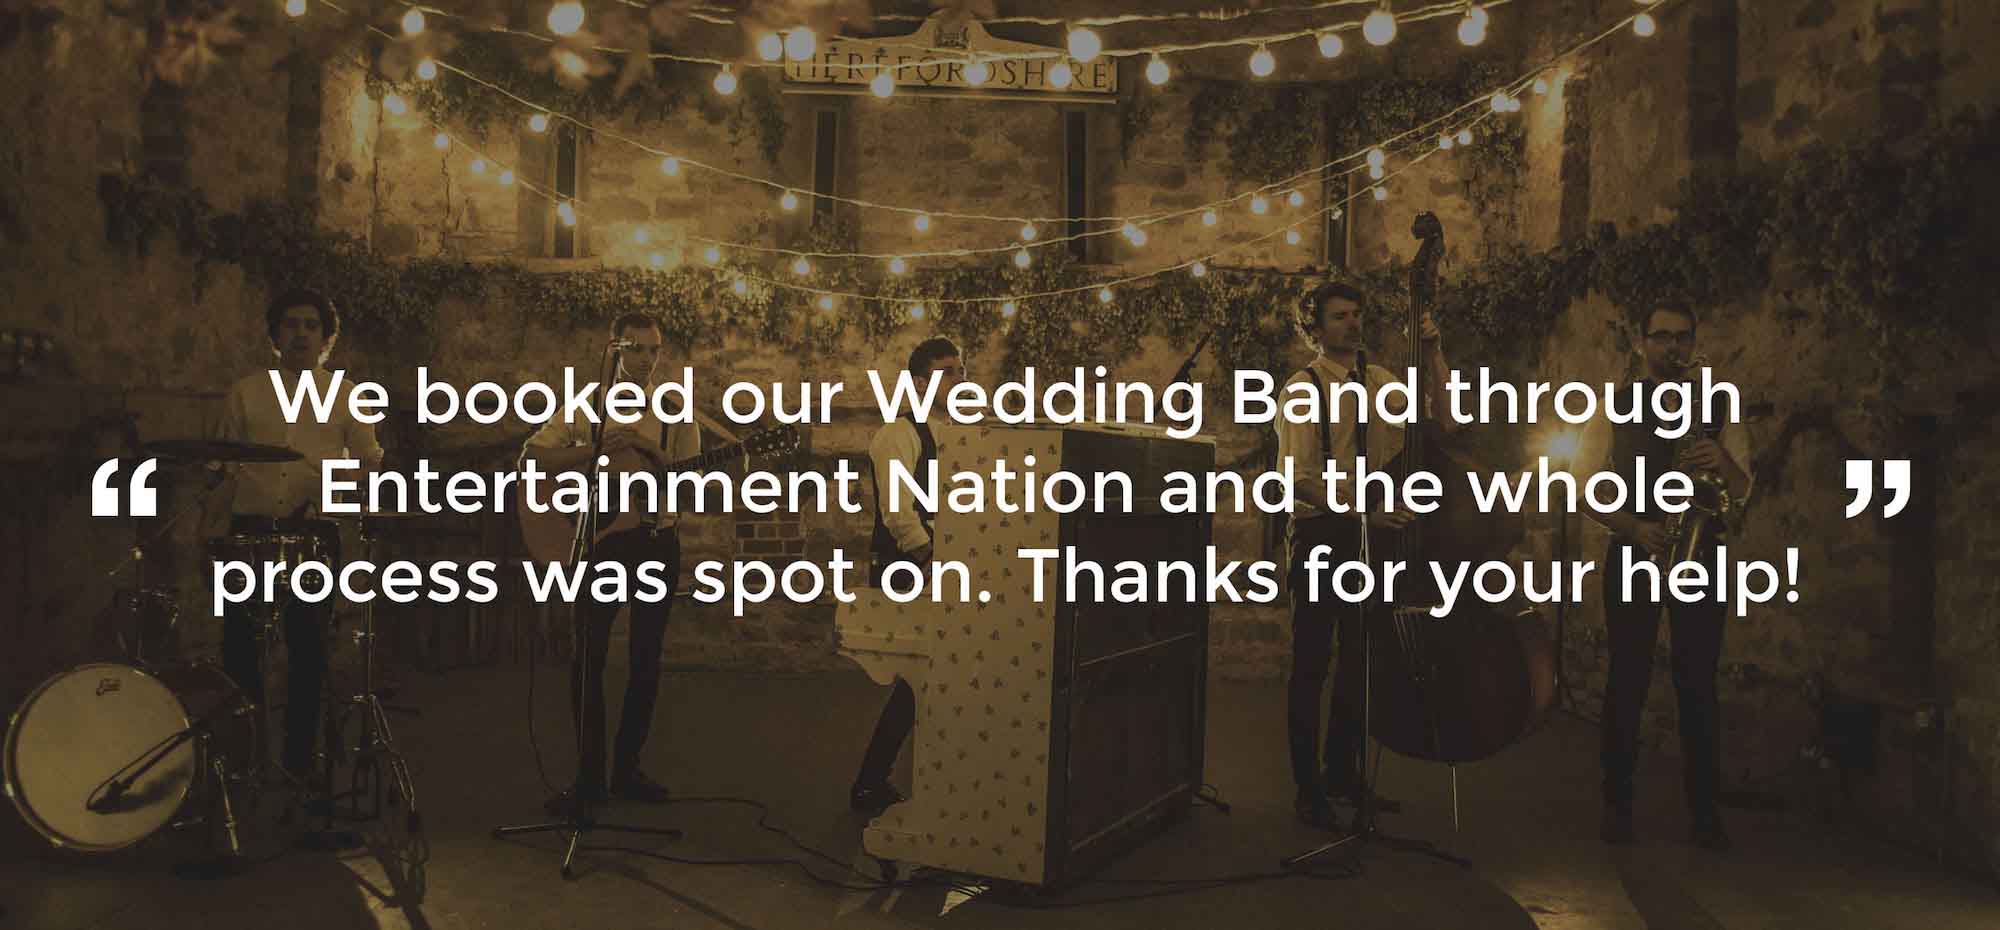 Client Review of a Wedding Band Cornwall